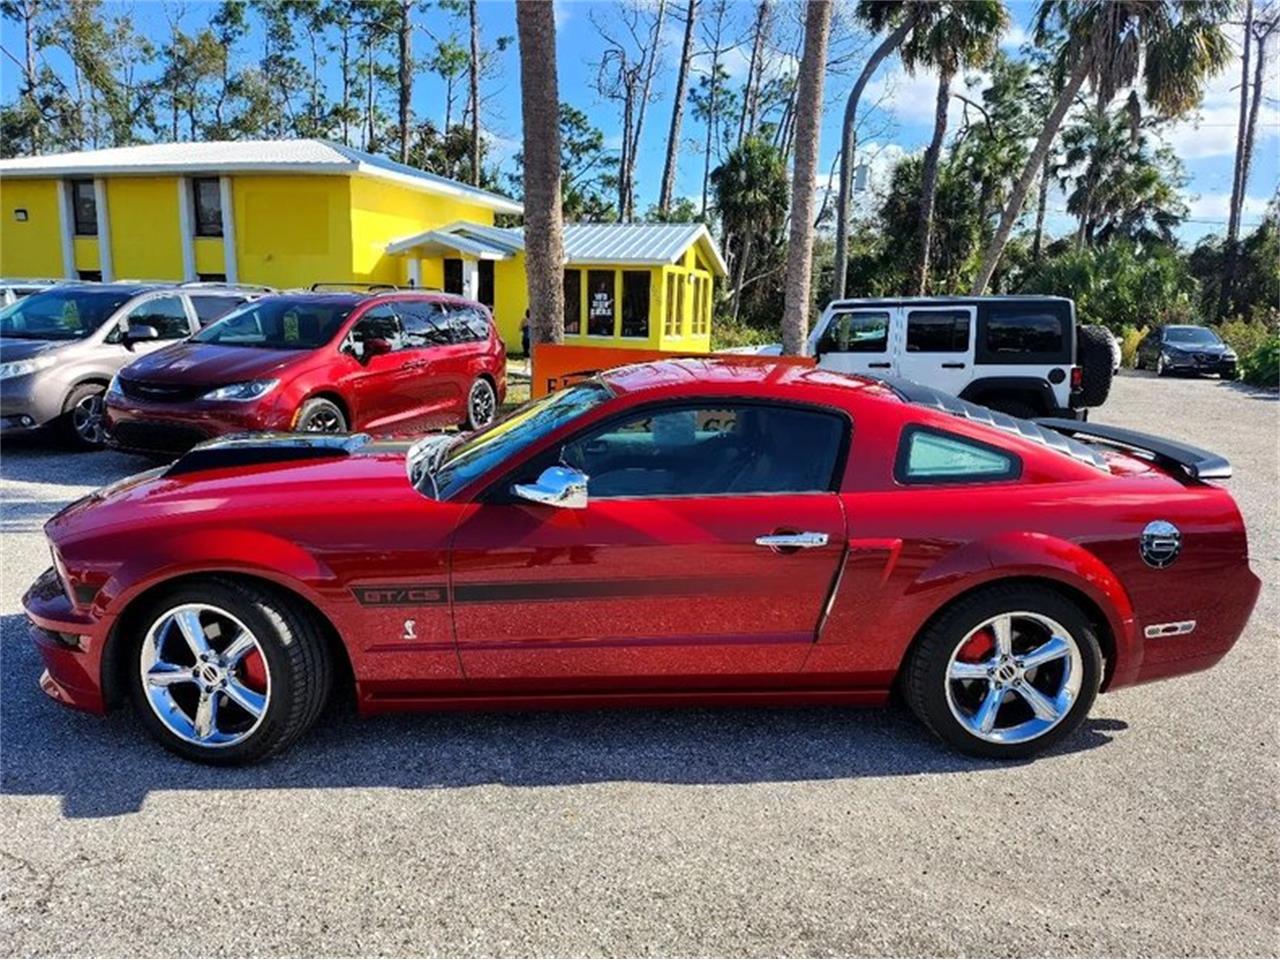 For Sale at Auction: 2008 Ford Mustang in Punta Gorda, Florida for sale in Punta Gorda, FL